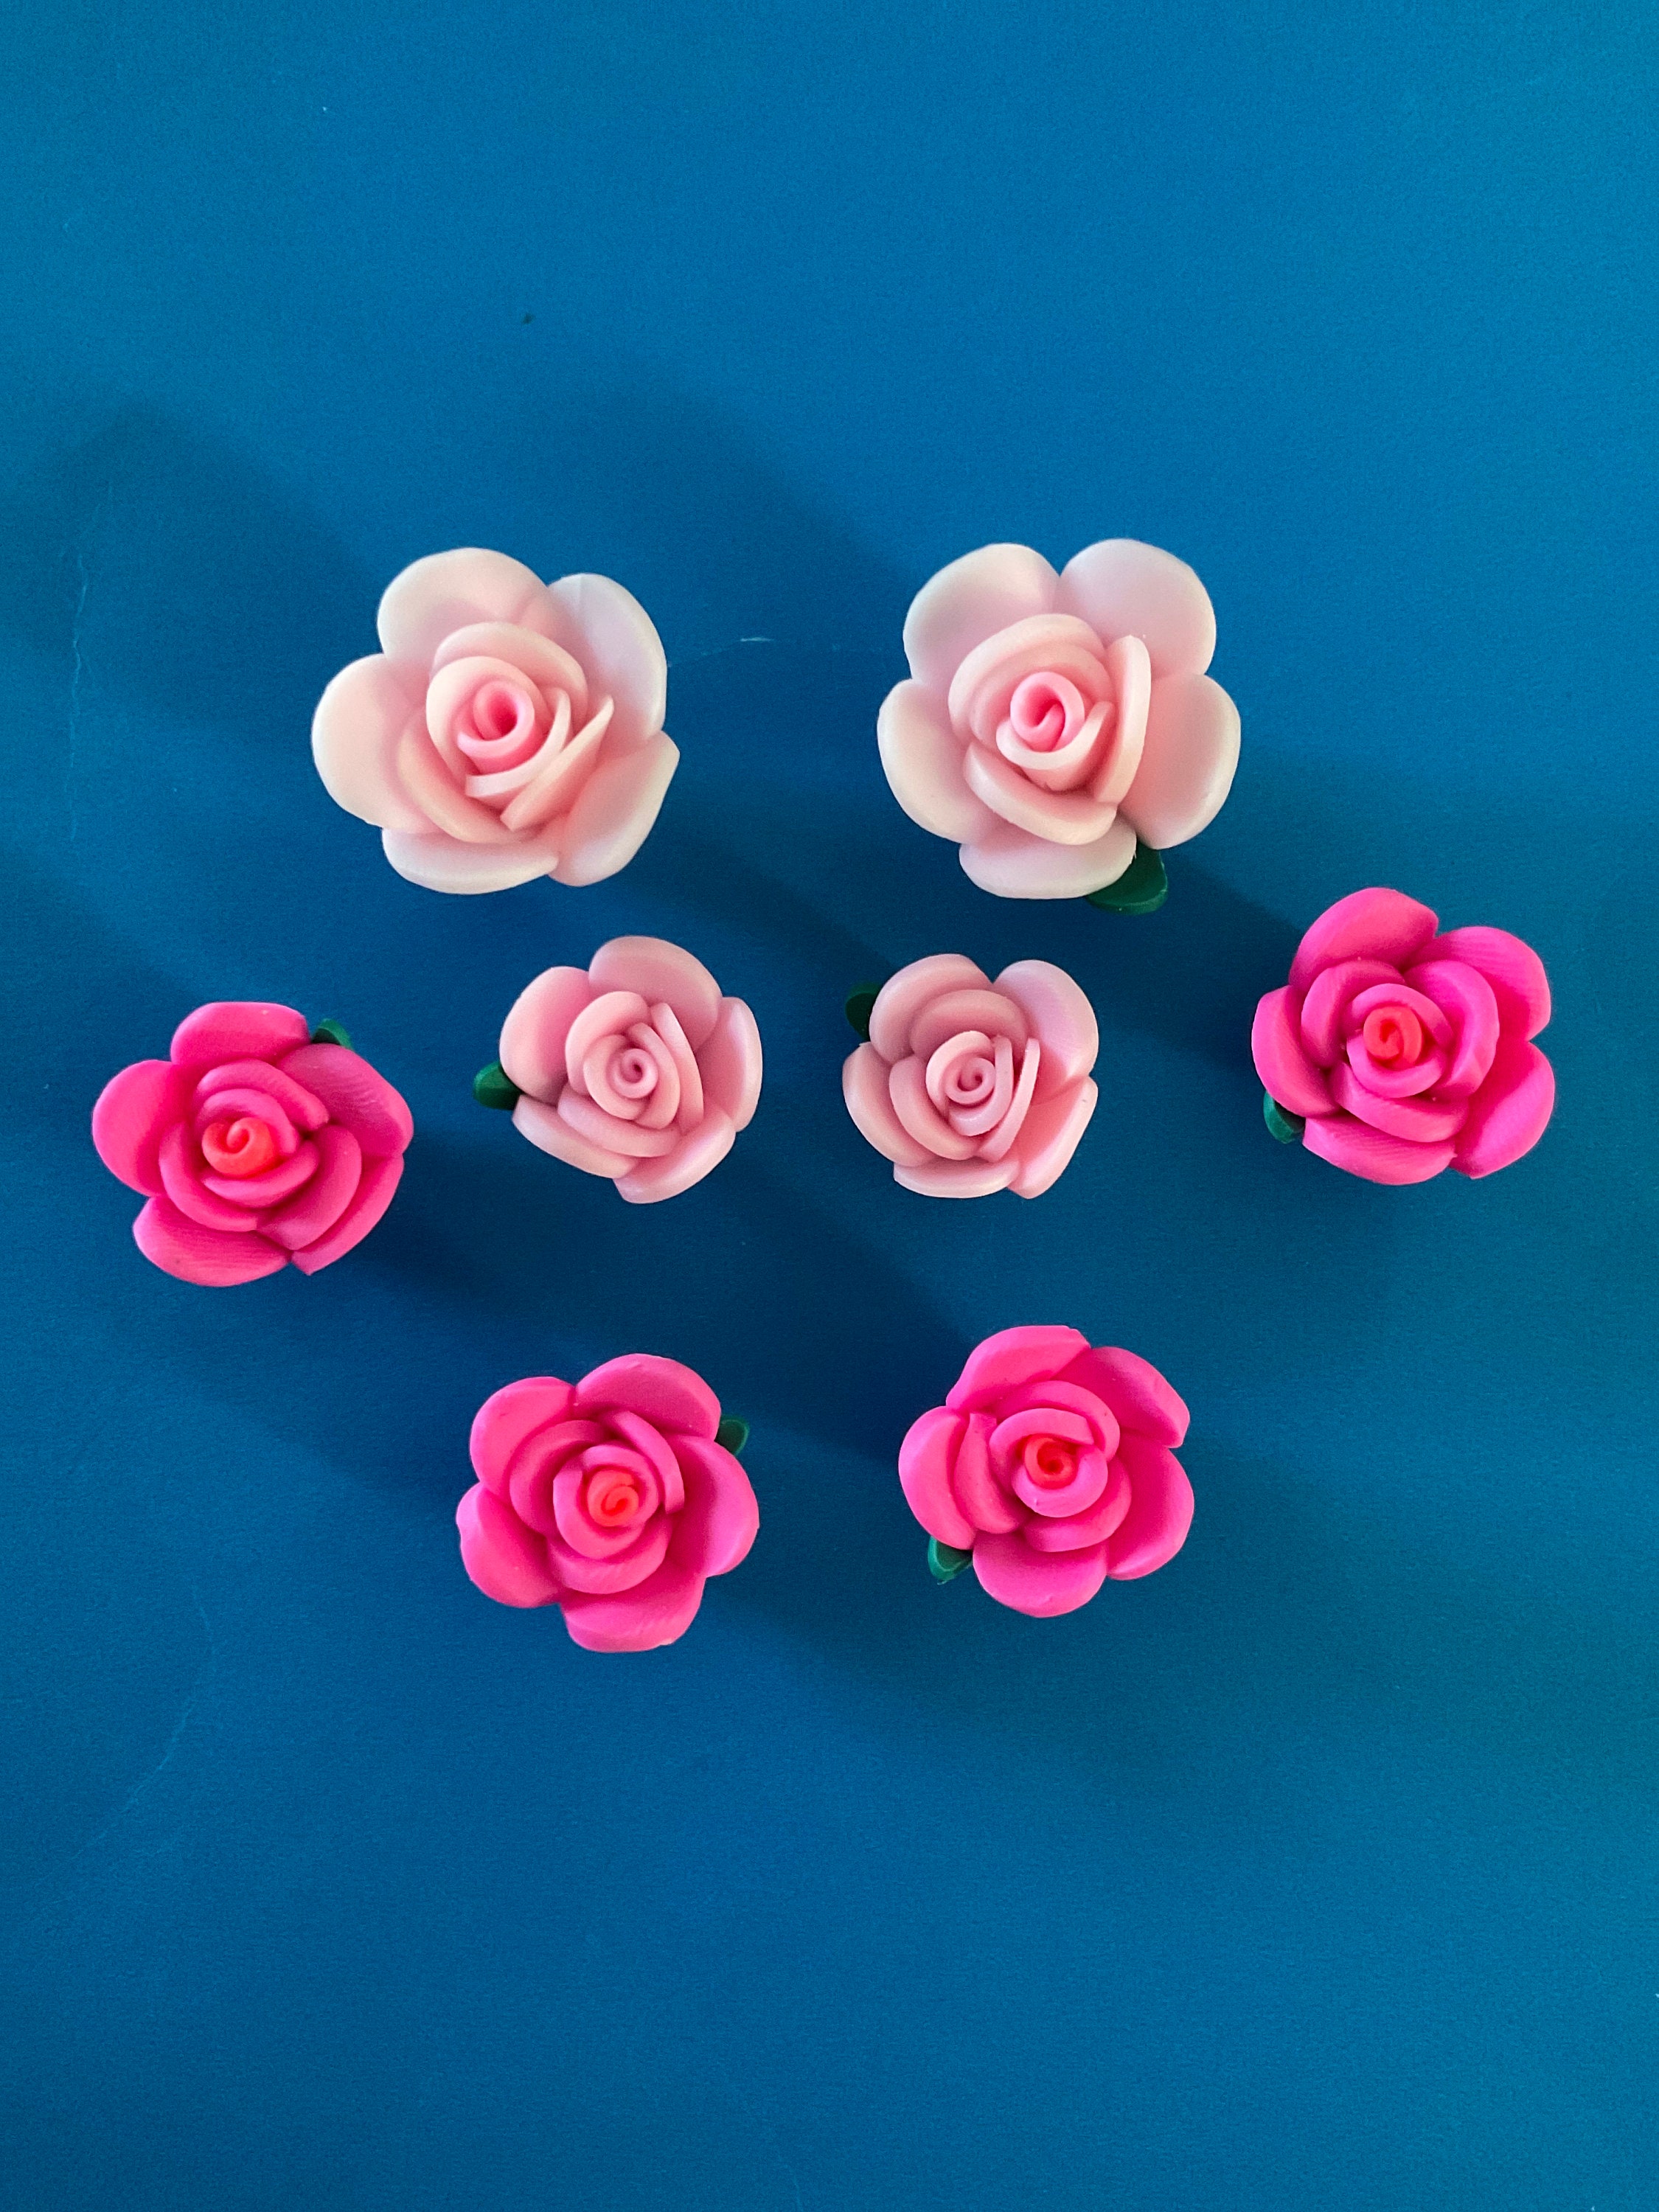 10 pcs Polymer Clay Flower Cabochon Assorted Color 20mm A3618 – VeryCharms